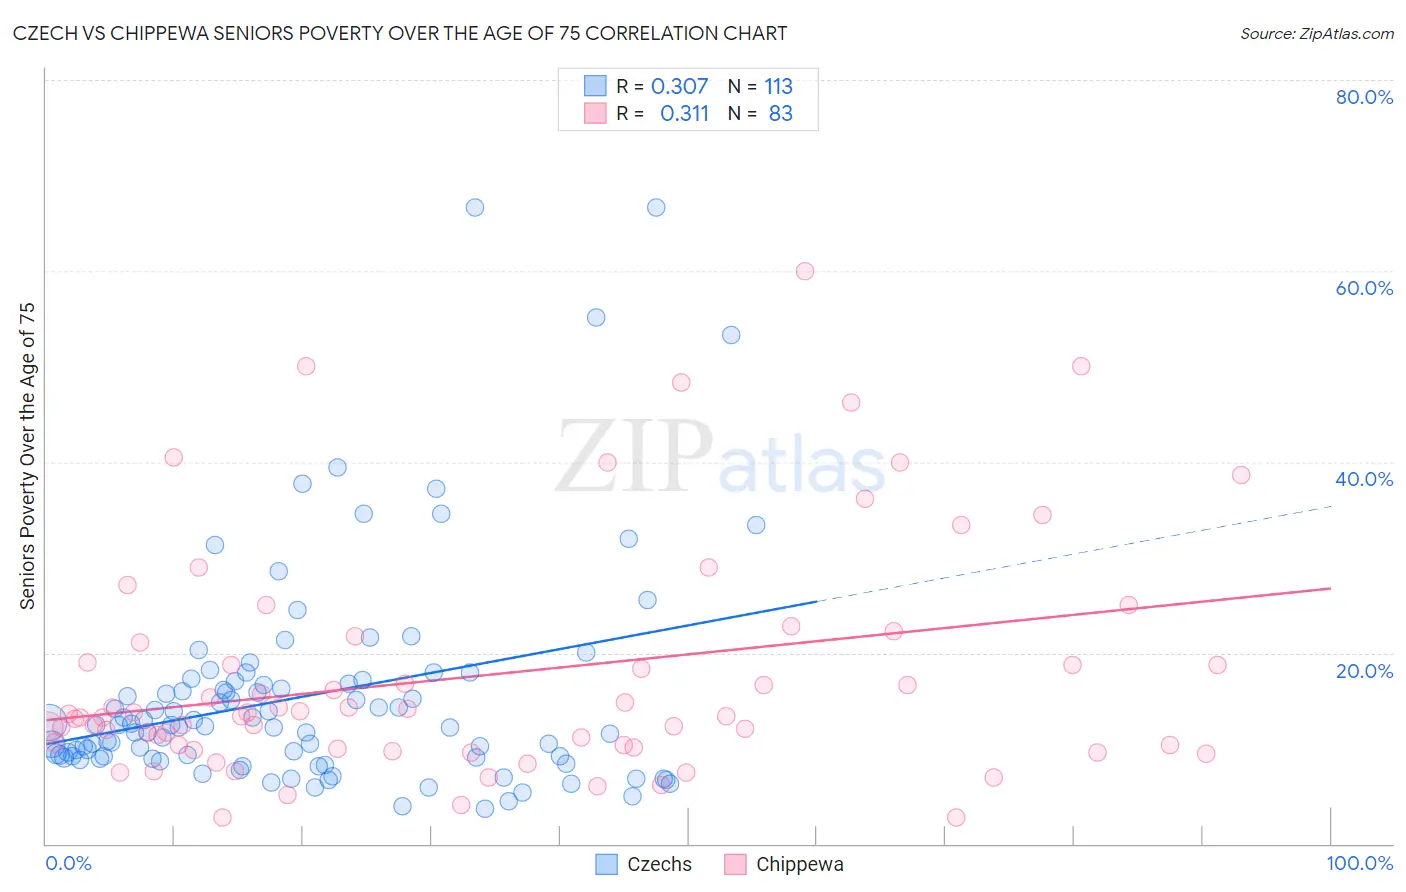 Czech vs Chippewa Seniors Poverty Over the Age of 75